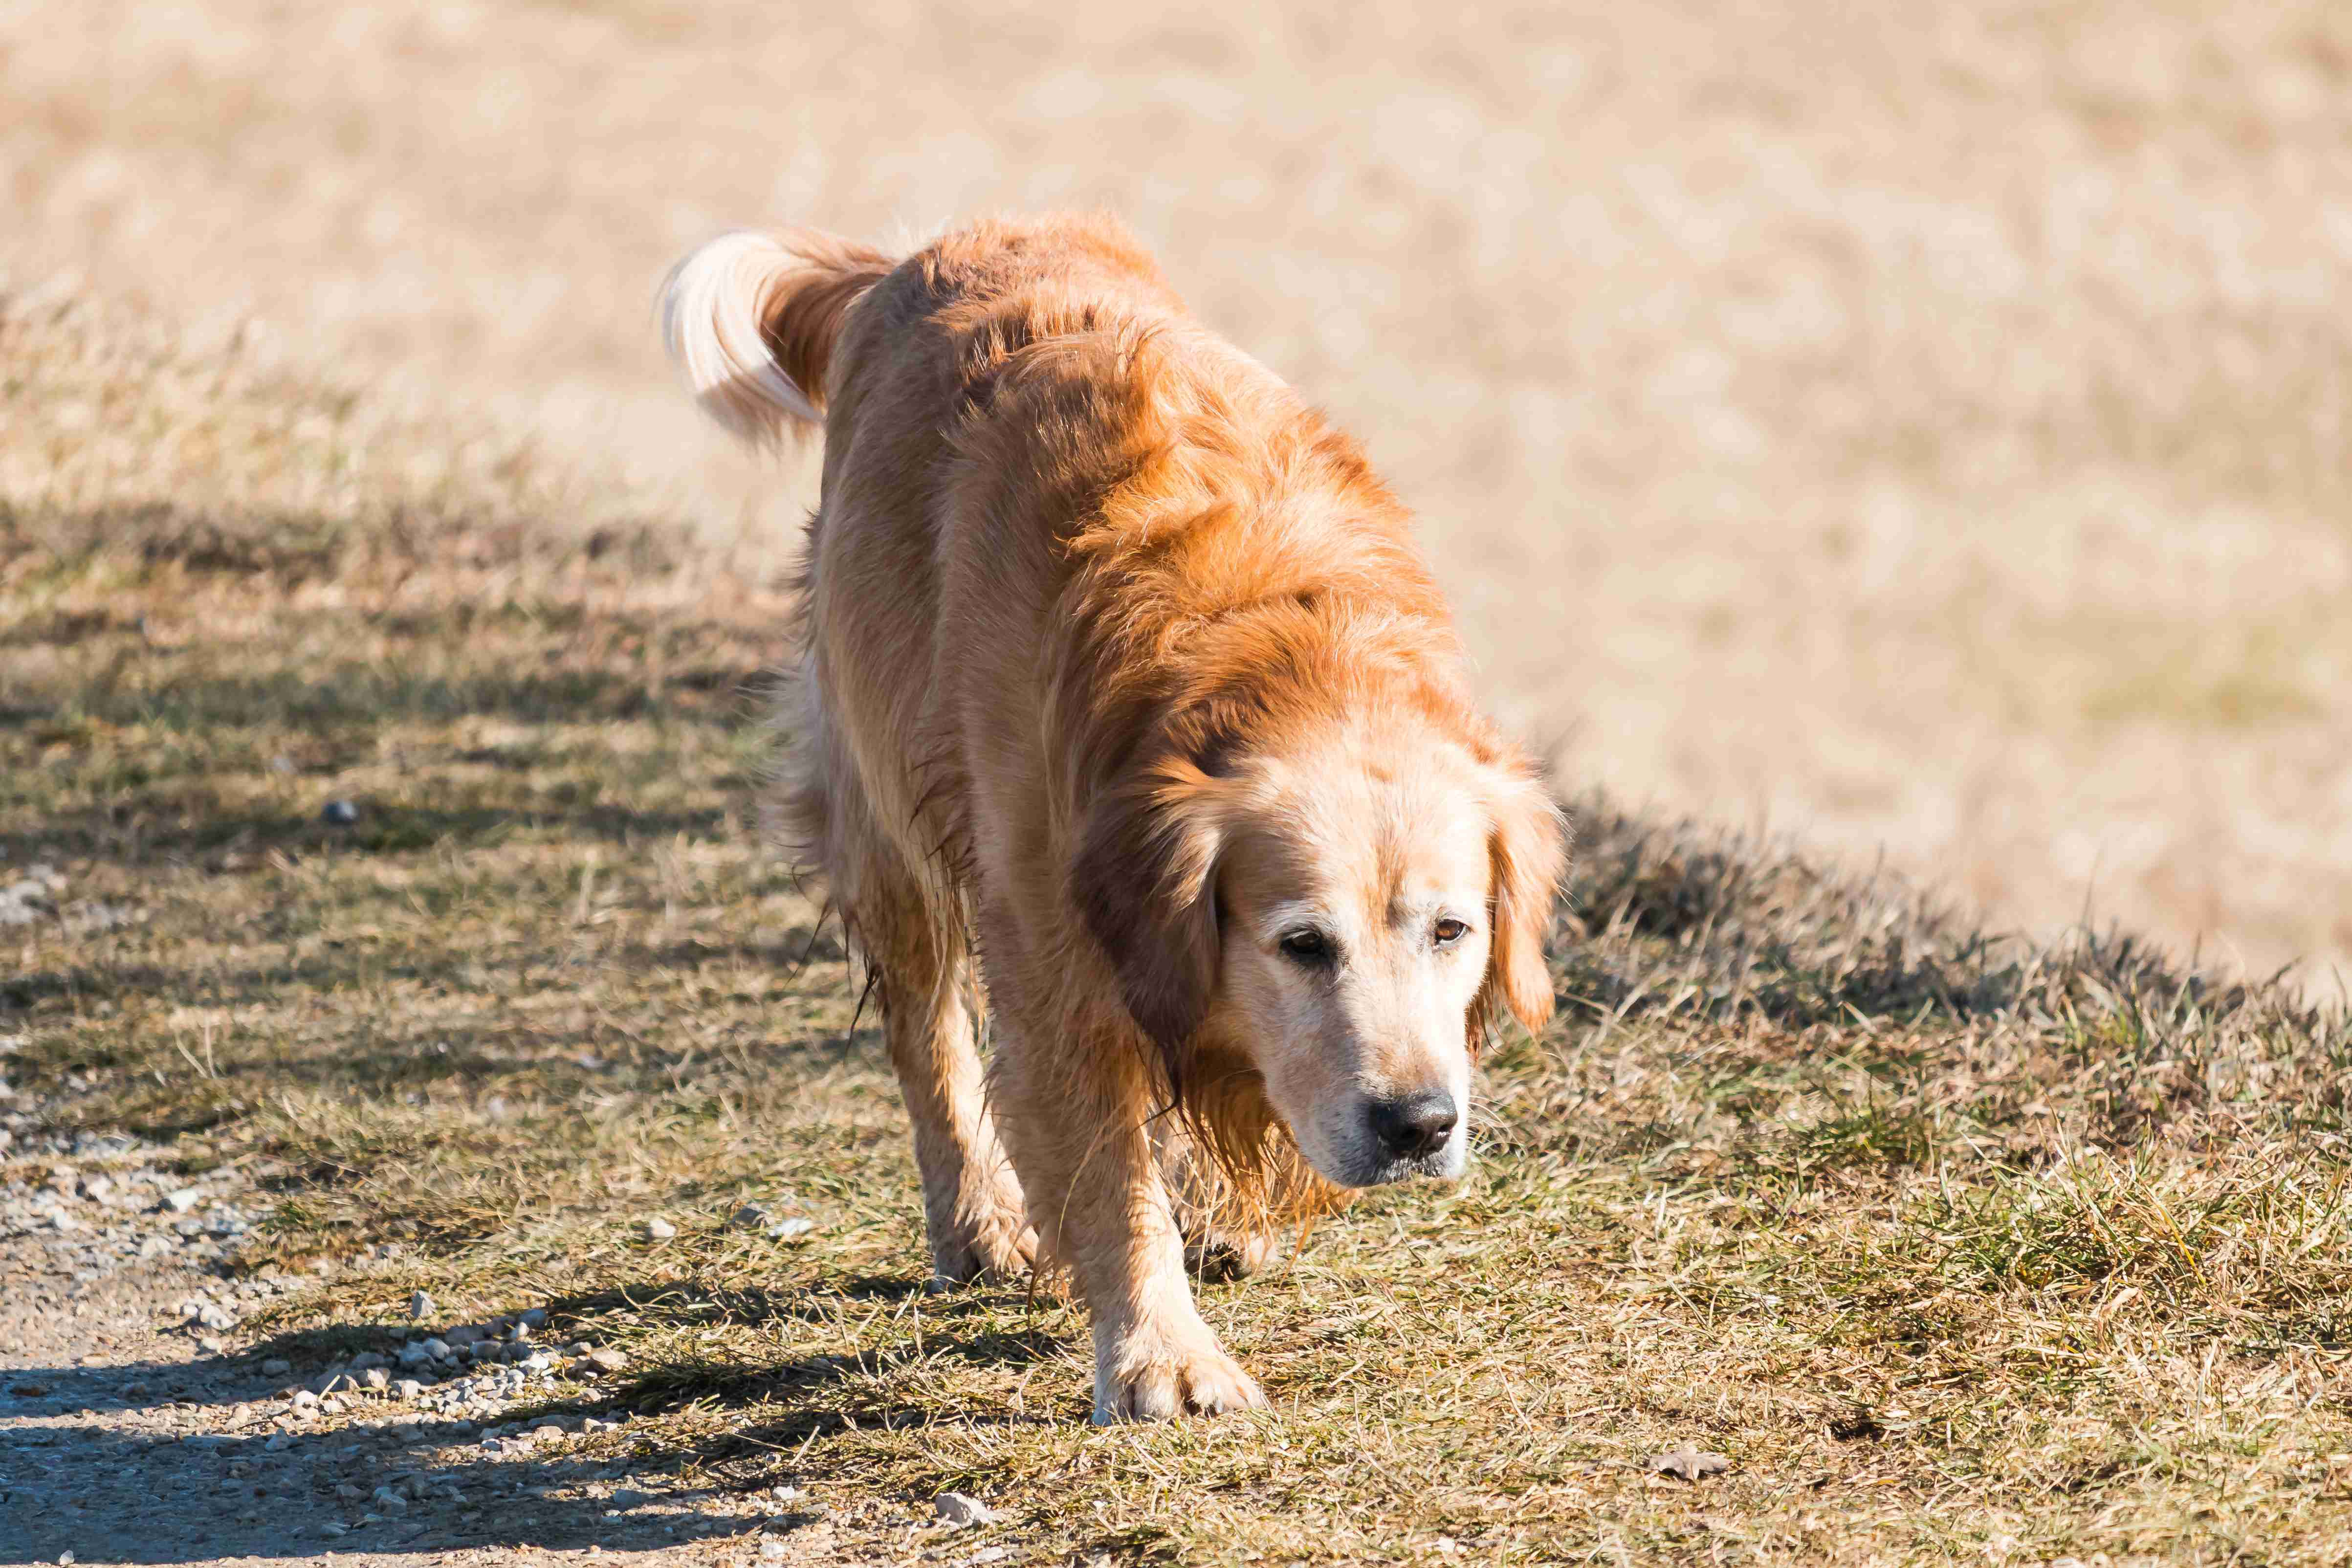 Feeding Your Golden Retriever: A Complete Guide on How Often to Feed